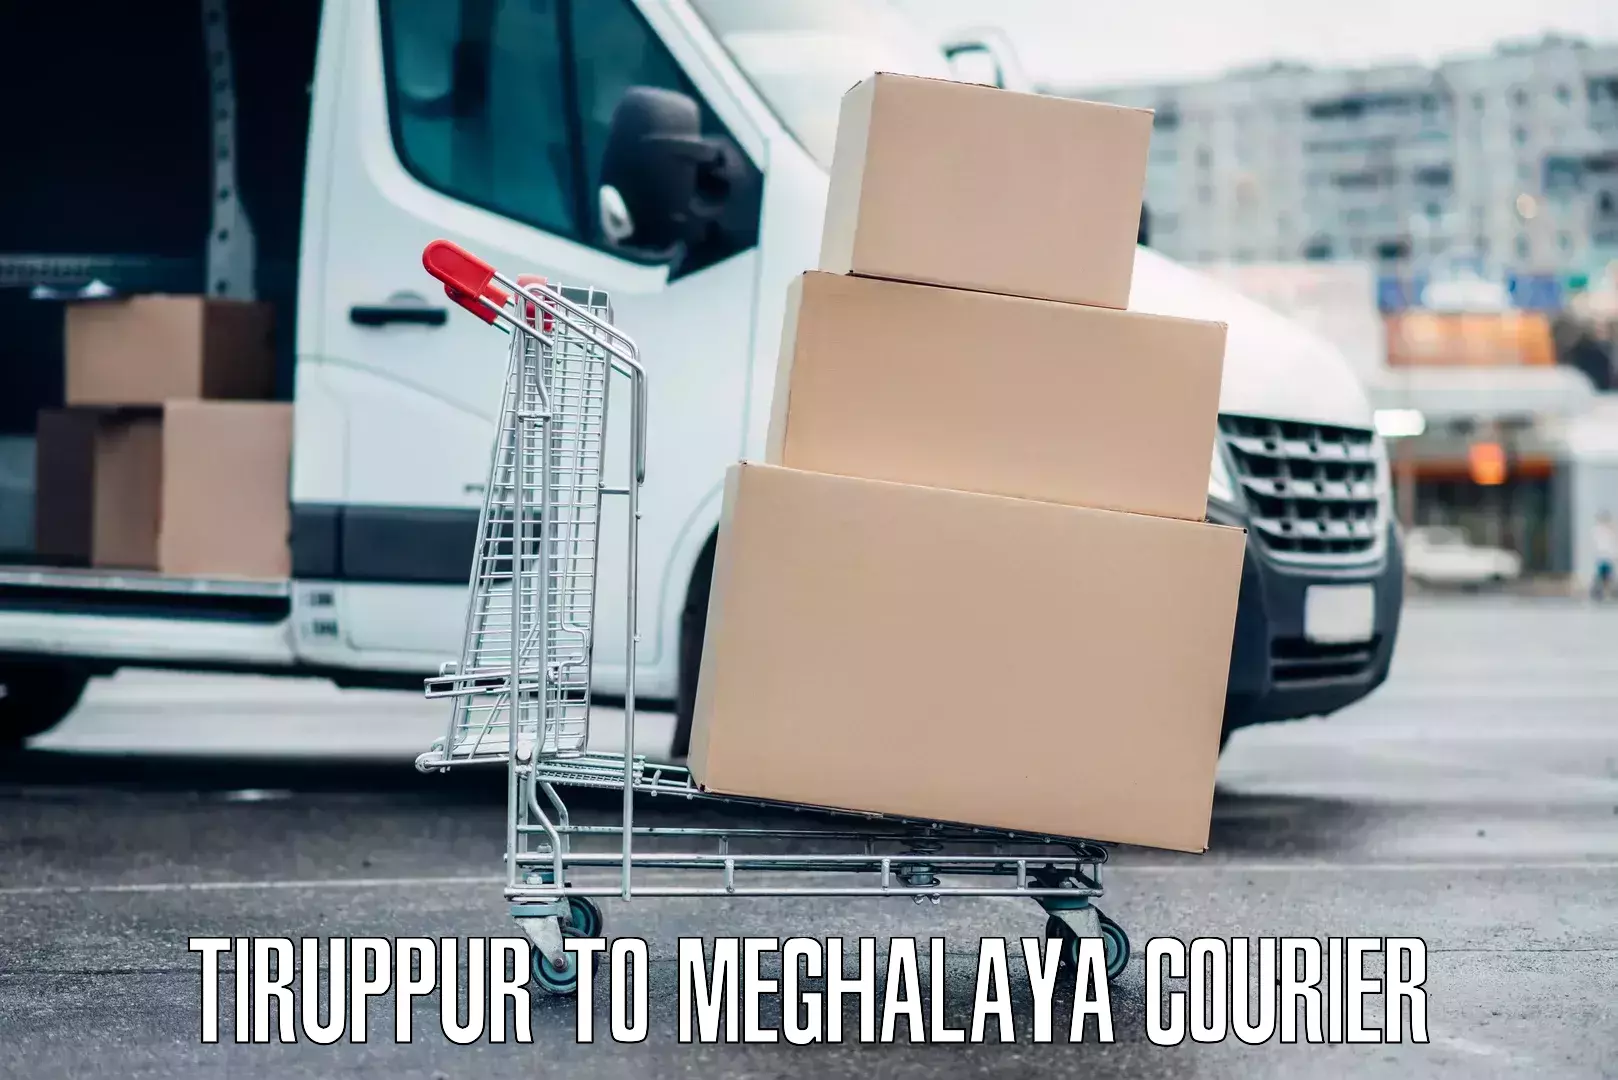 Luggage delivery app Tiruppur to Meghalaya